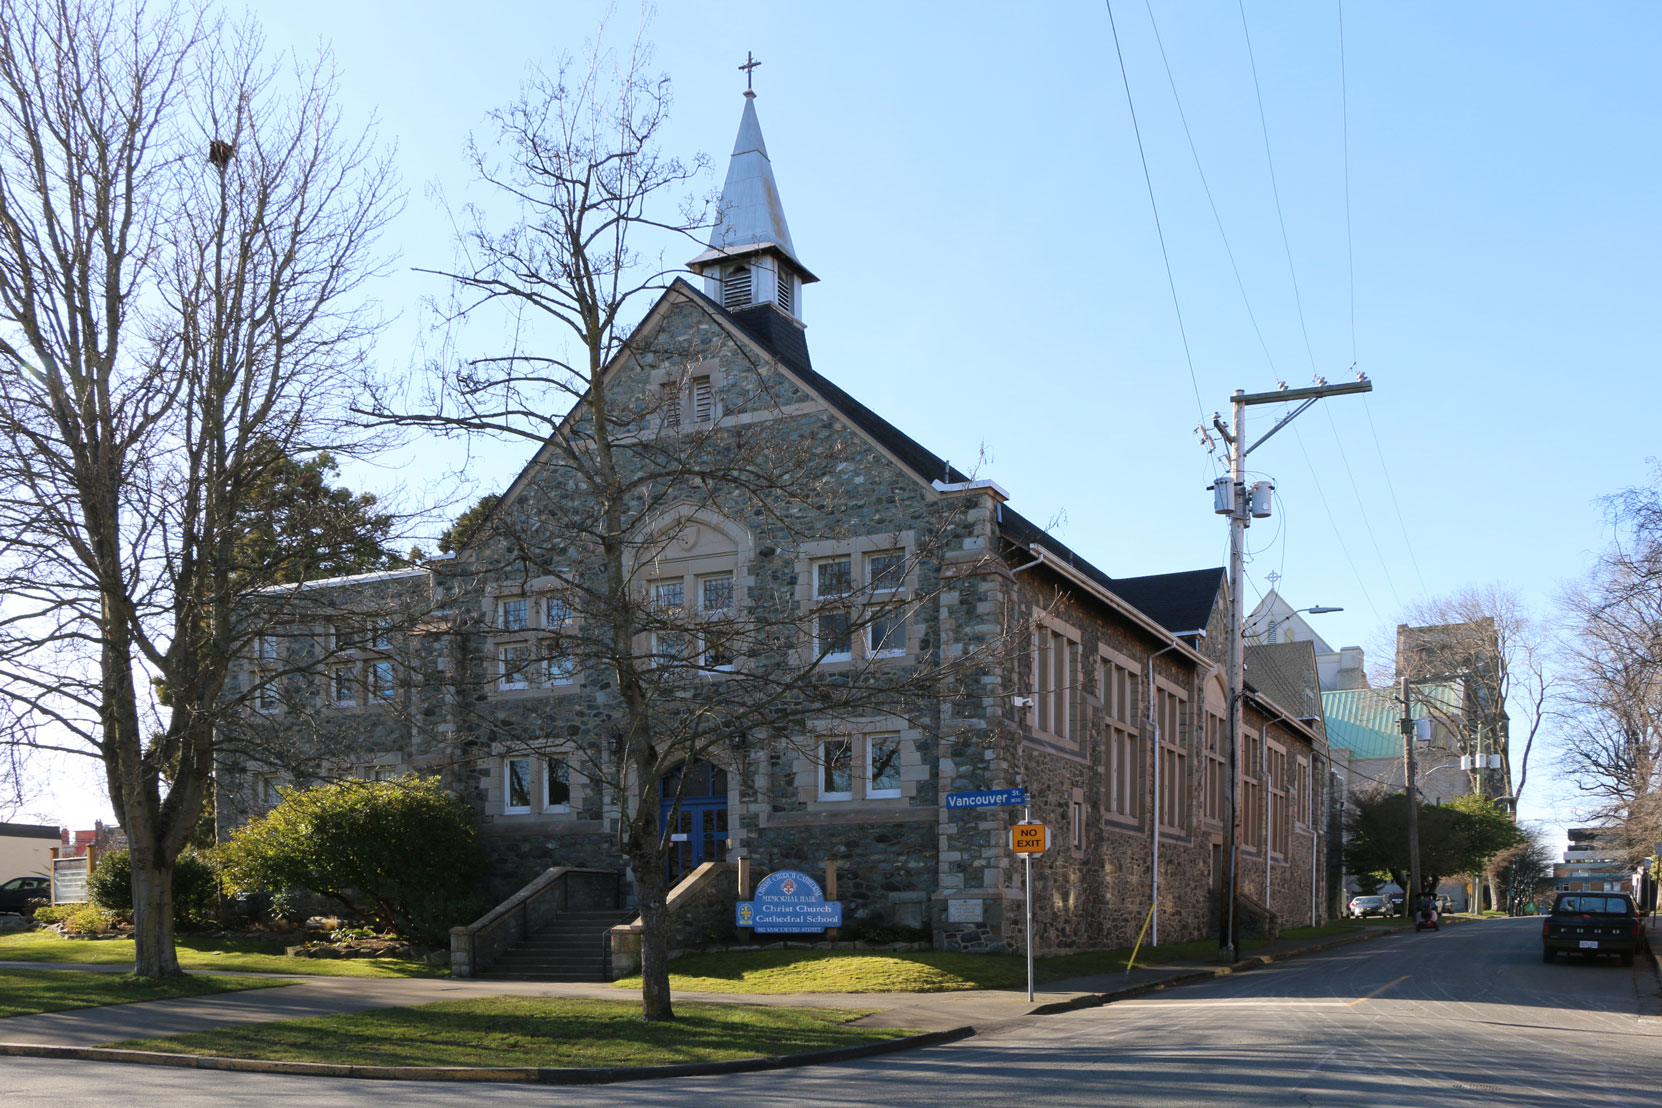 912 Vancouver Street, built in 1923 by architect J.C.M. Keith as the Christ Church cathedral memorial Hall. It is now the Cathedral School (photo: Victoria Online Sightseeing Tours)